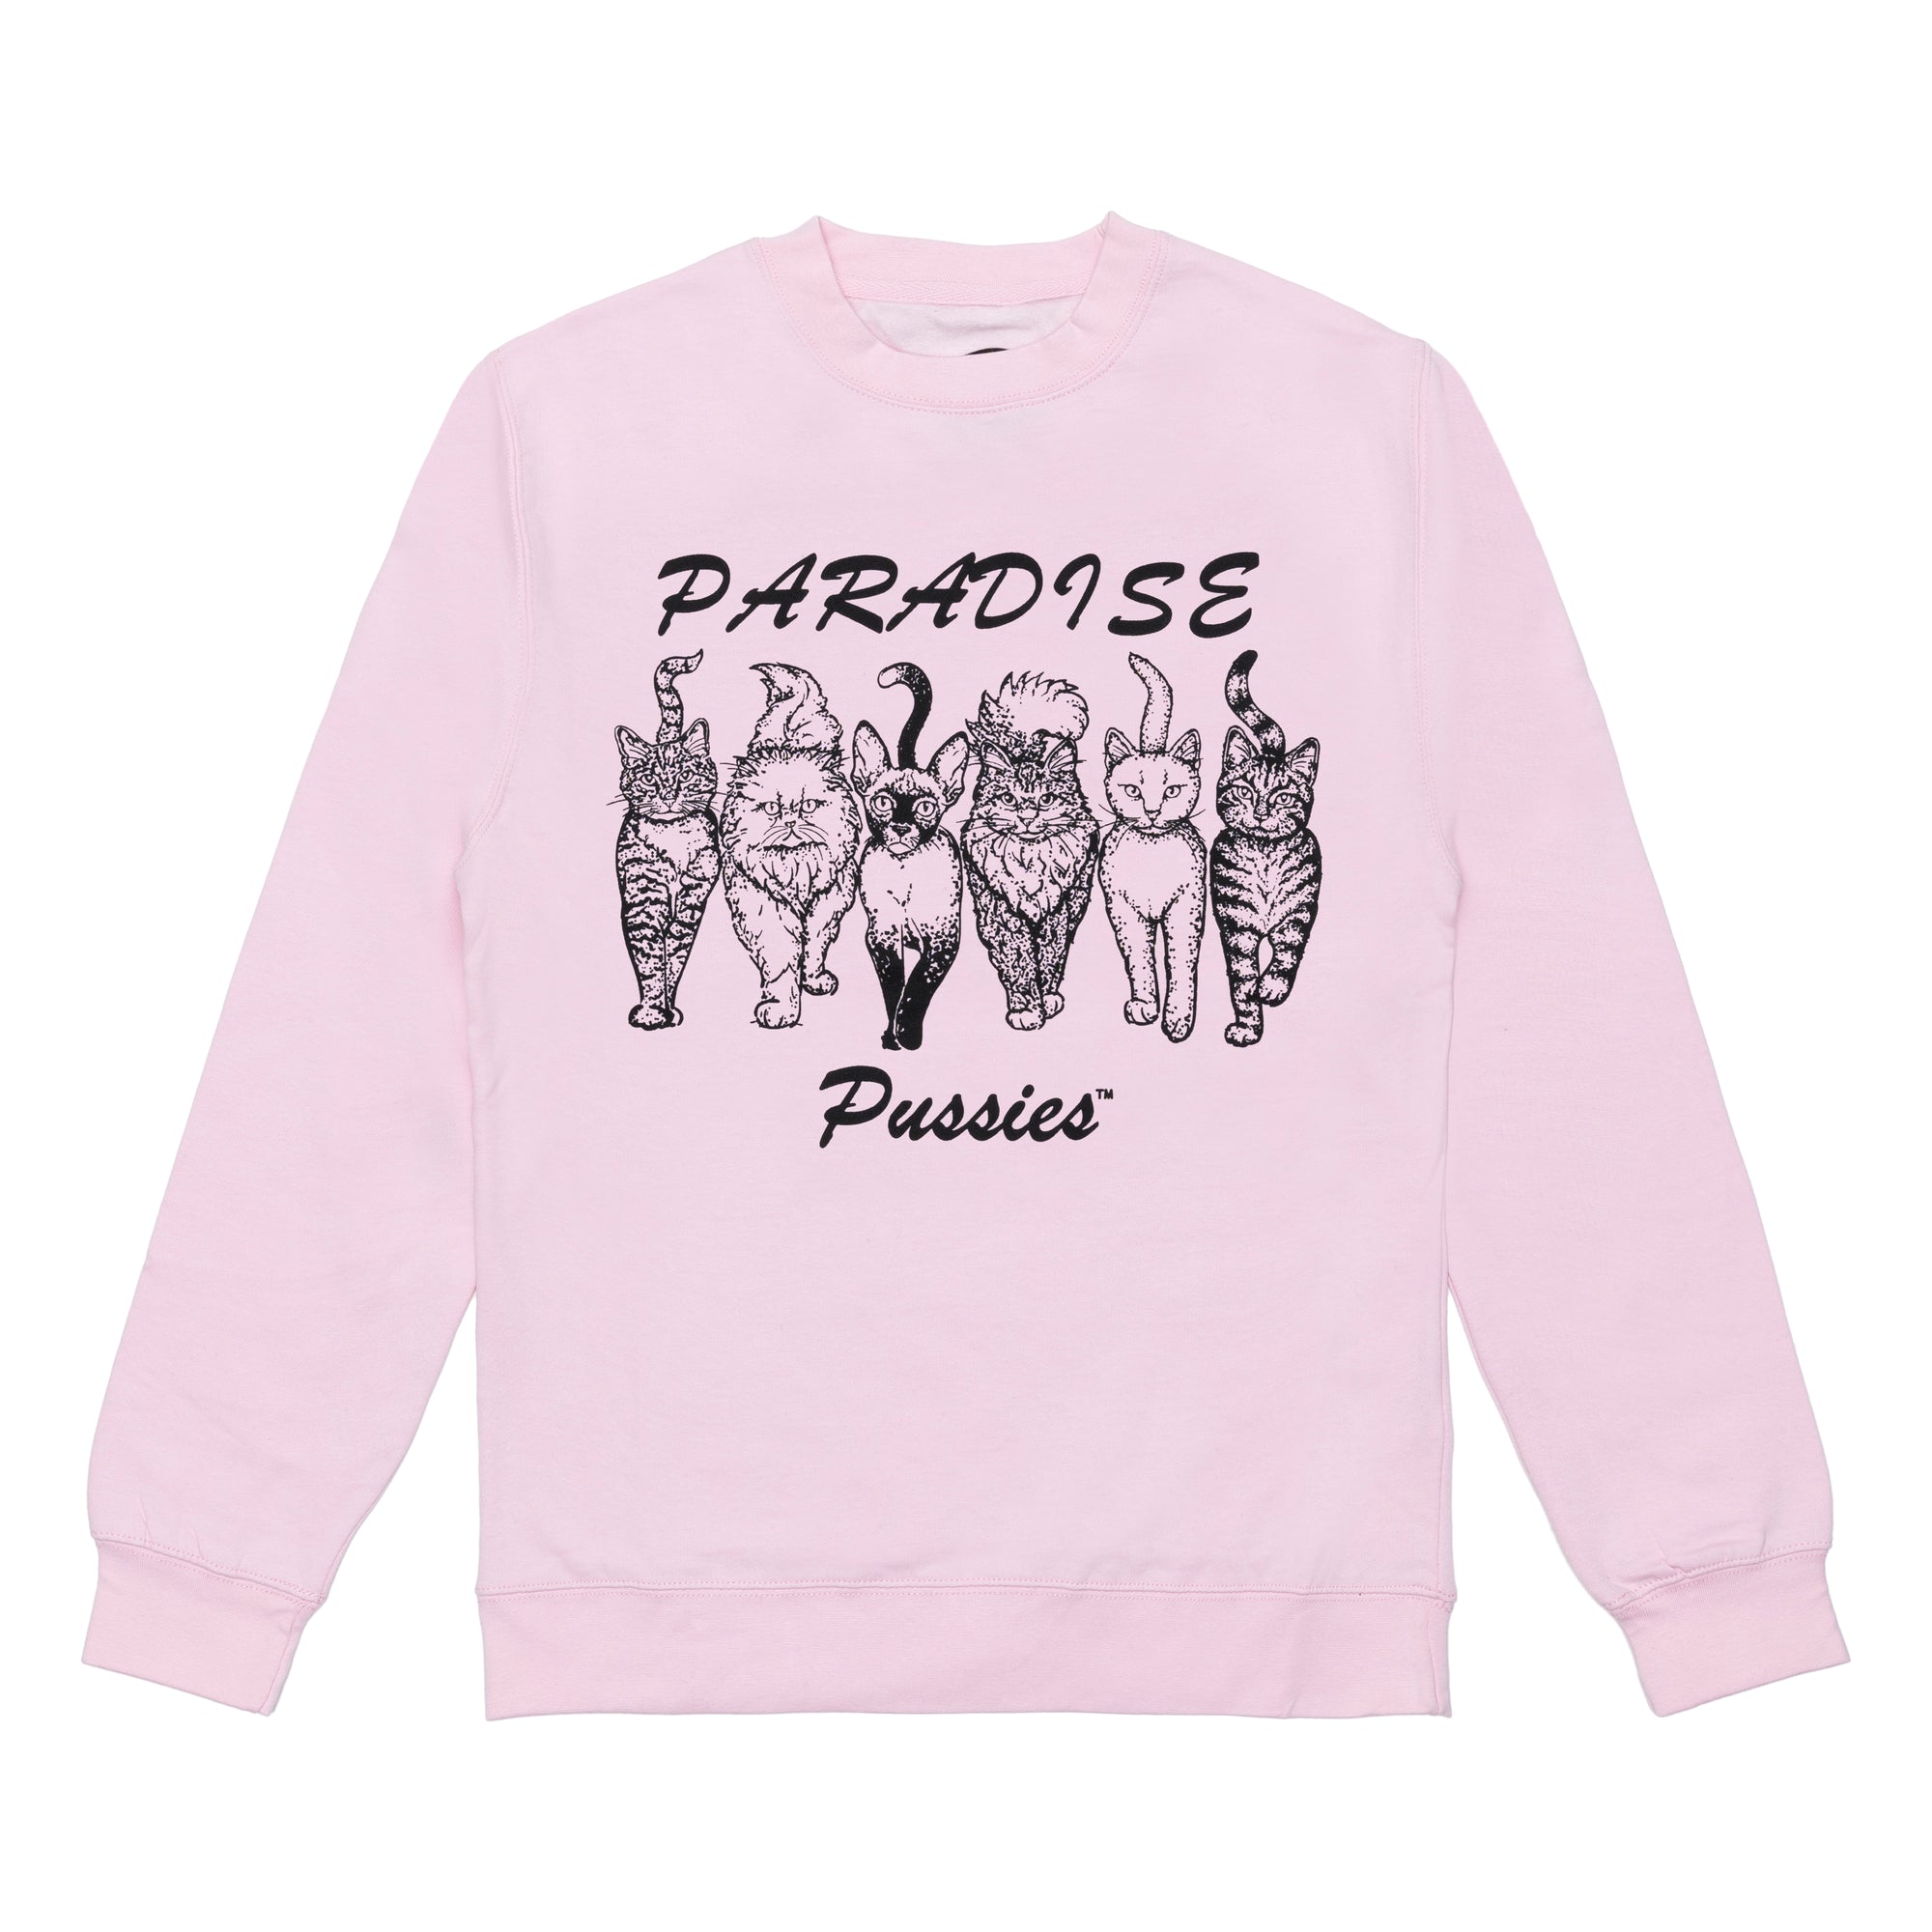 PARADISE - Paradise Pussies Crew - (Pink) view 1